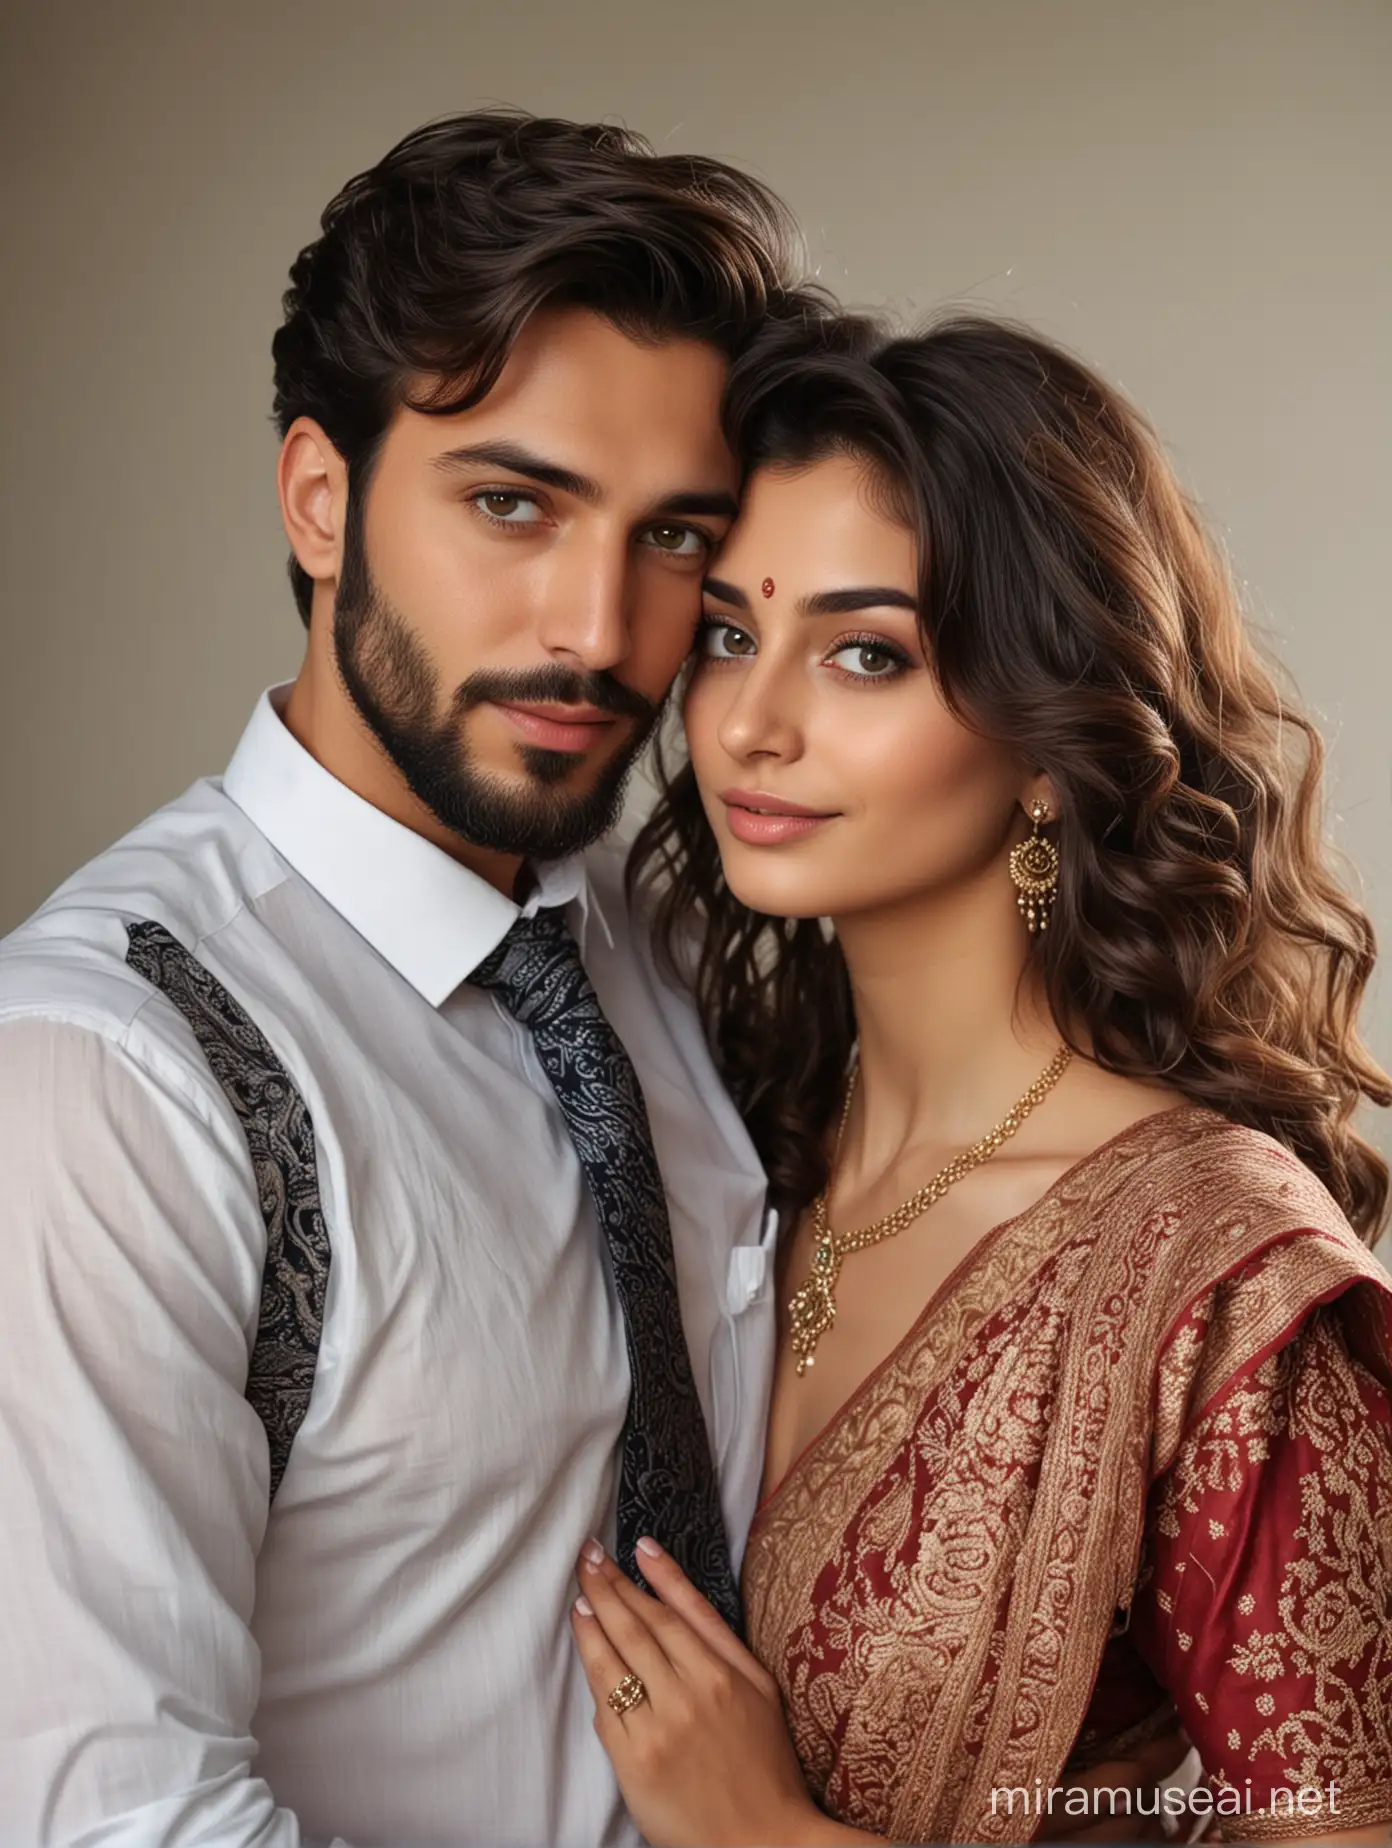 full portrait photo of most beautiful european couple as most beautiful indian couple, most beautiful cute girl in elegant COLOR saree, wide black eyes, full face, girl has long wavy hair cascading, makeup, blouse low cut, full neckless, girl embracing, resting head on chest of man with deep emotion and excitement, man comforting girl with hands around her, man with stylish beard and perfect short hair cut, man in formal shirt and tie, photo realistic, 4k.